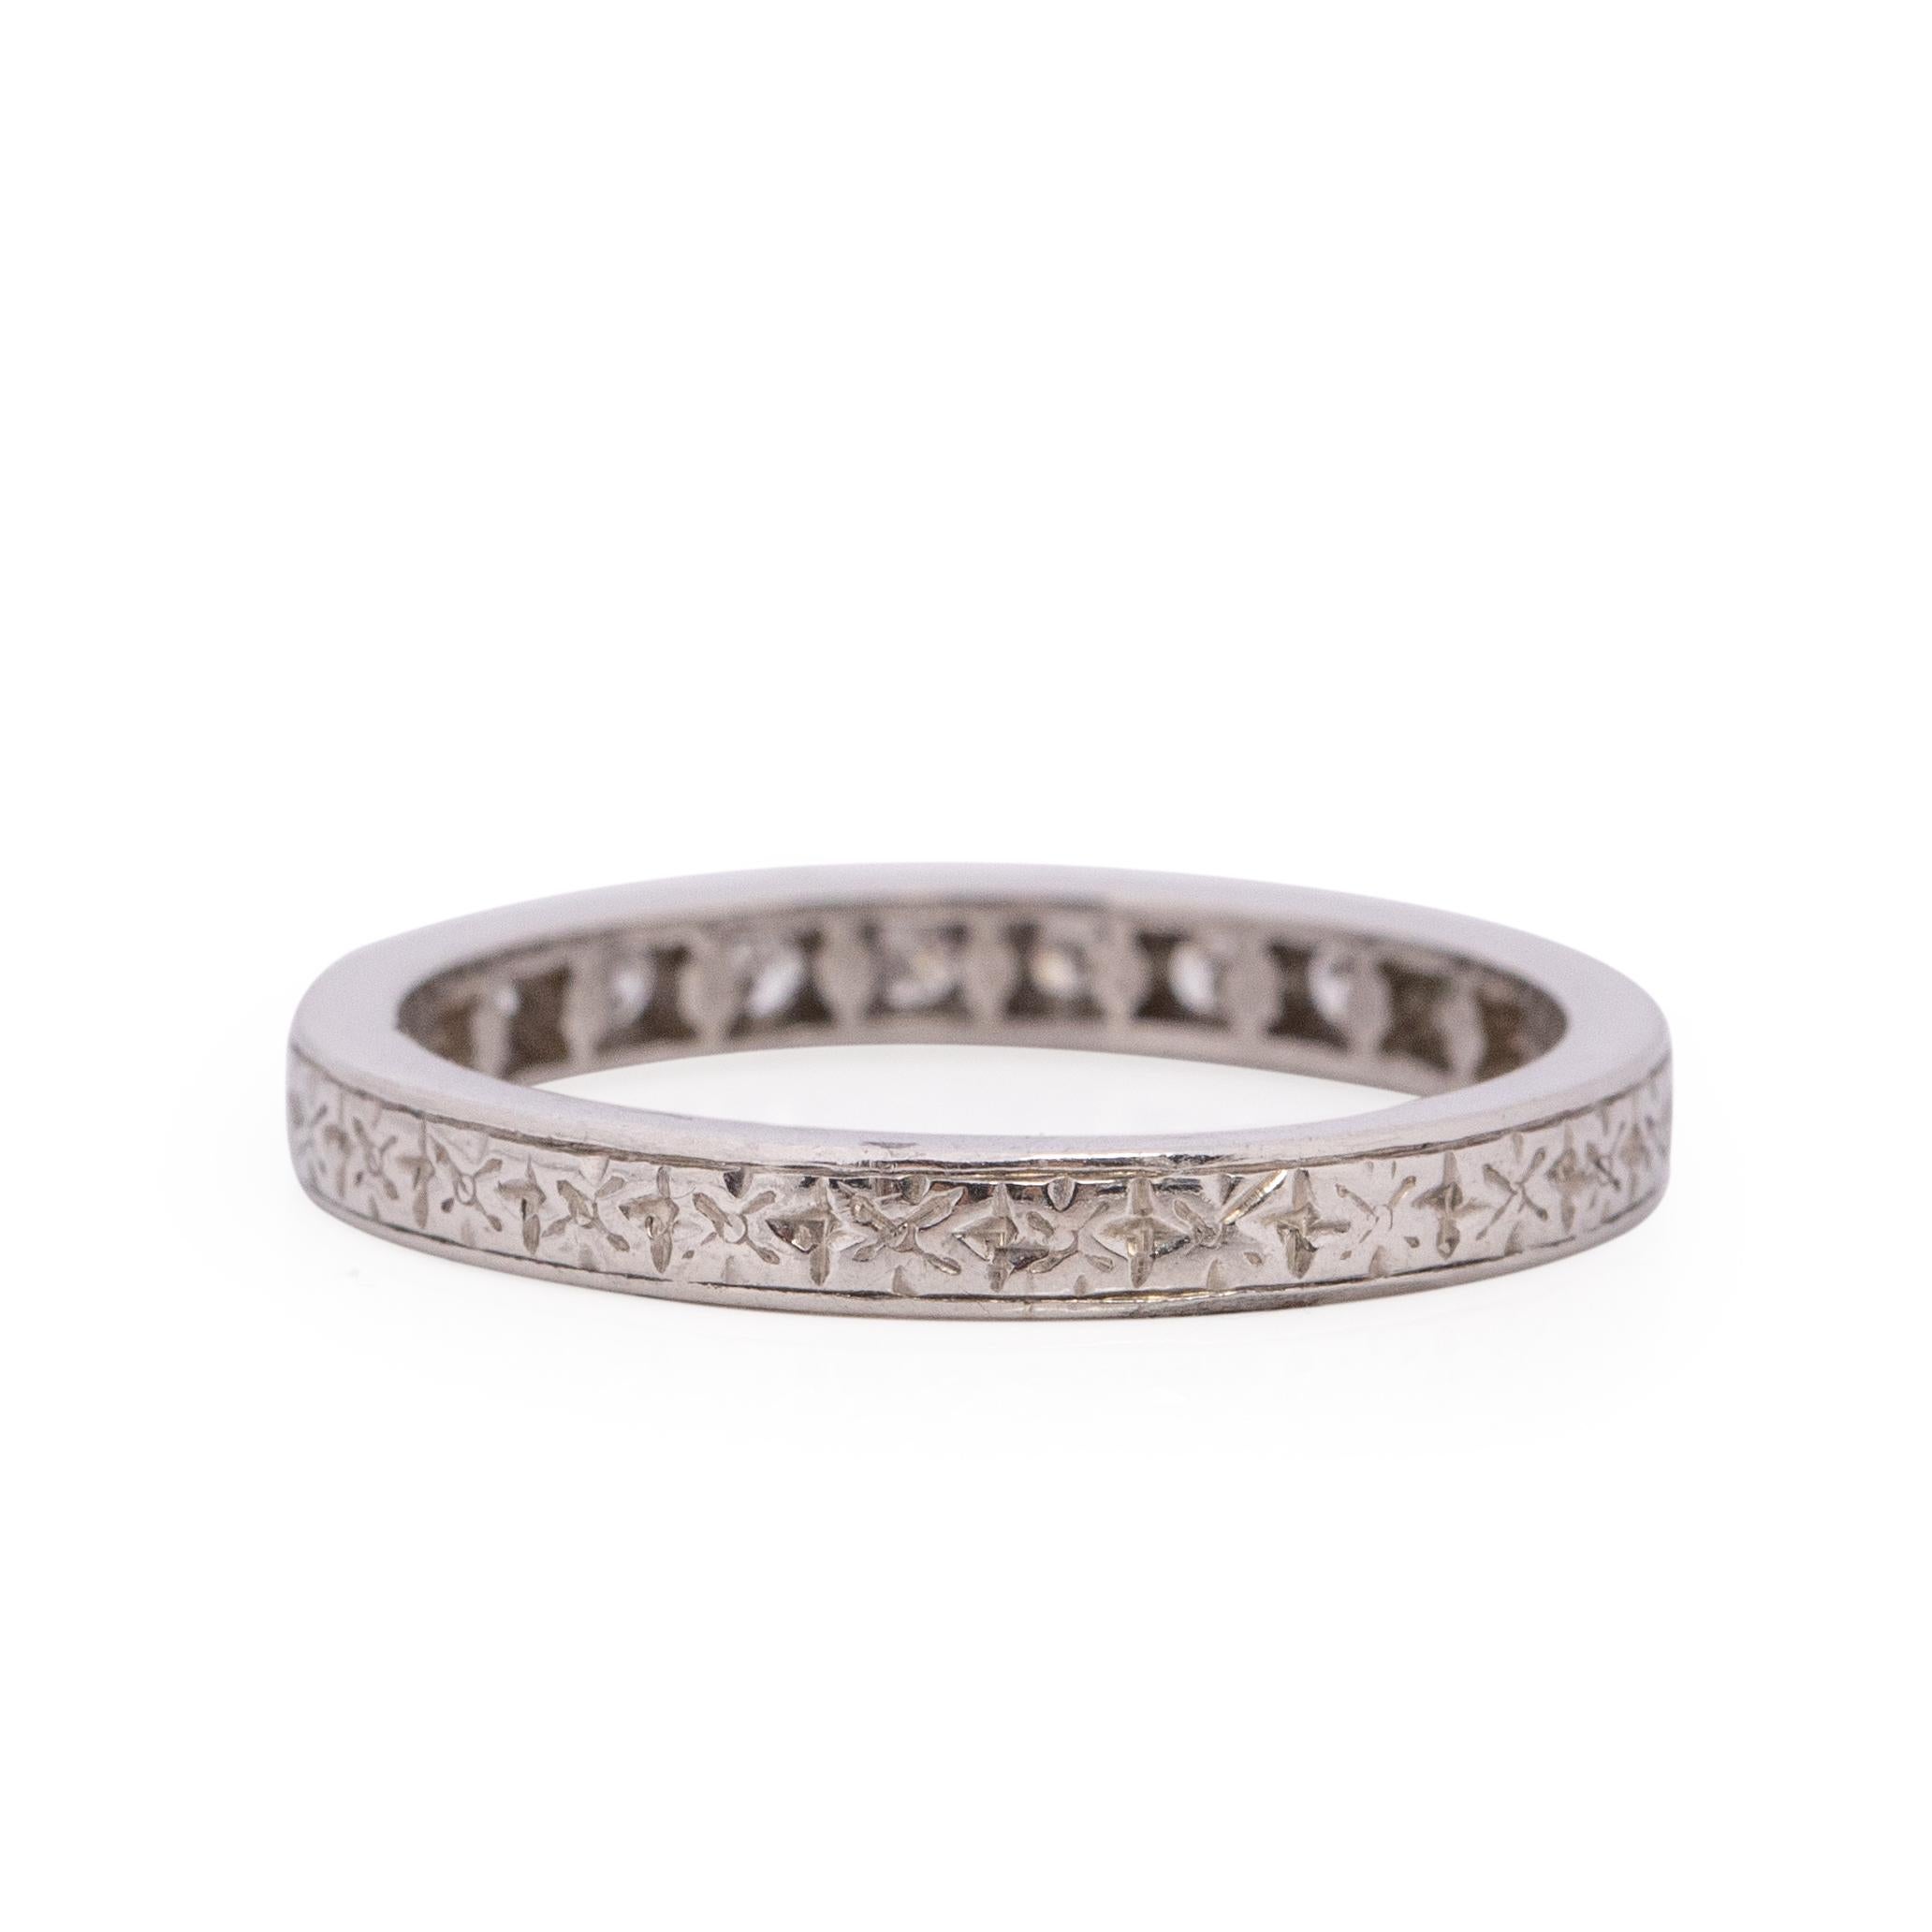 Here we have a genuine Art Deco era band crafted in palladium! This is a great example of a vintage diamond band maintaining most of the excellent etching work original to the ring. This beautiful ring is accented with 10 chunky early old European